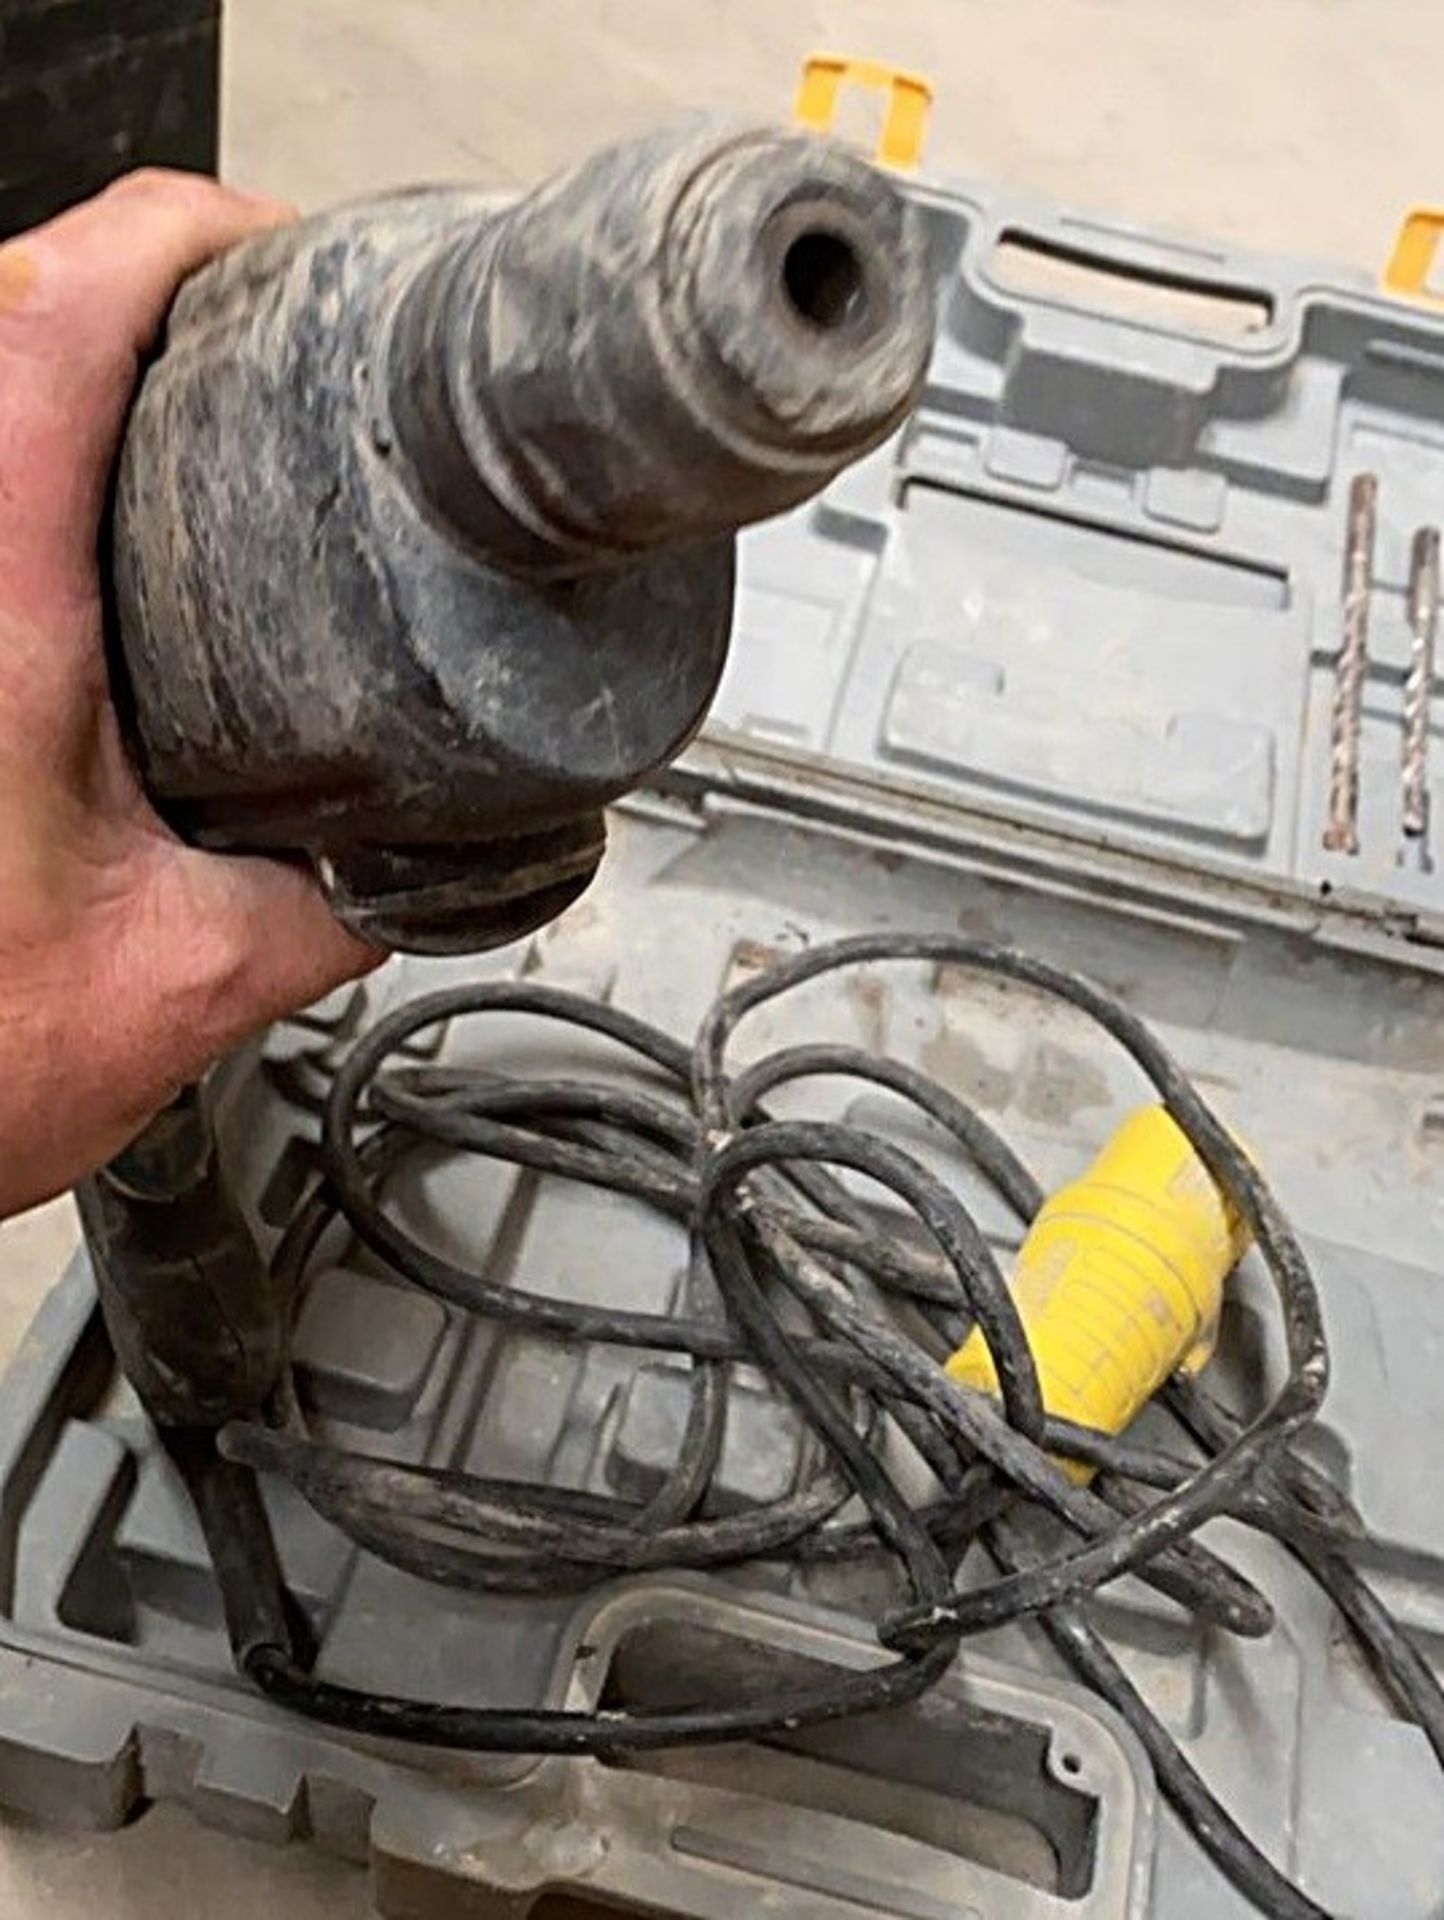 1 x Ryobi 110V Impact Drill - Used, Recently Removed From A Working Site - CL505 - Ref: TL027 - - Image 3 of 5